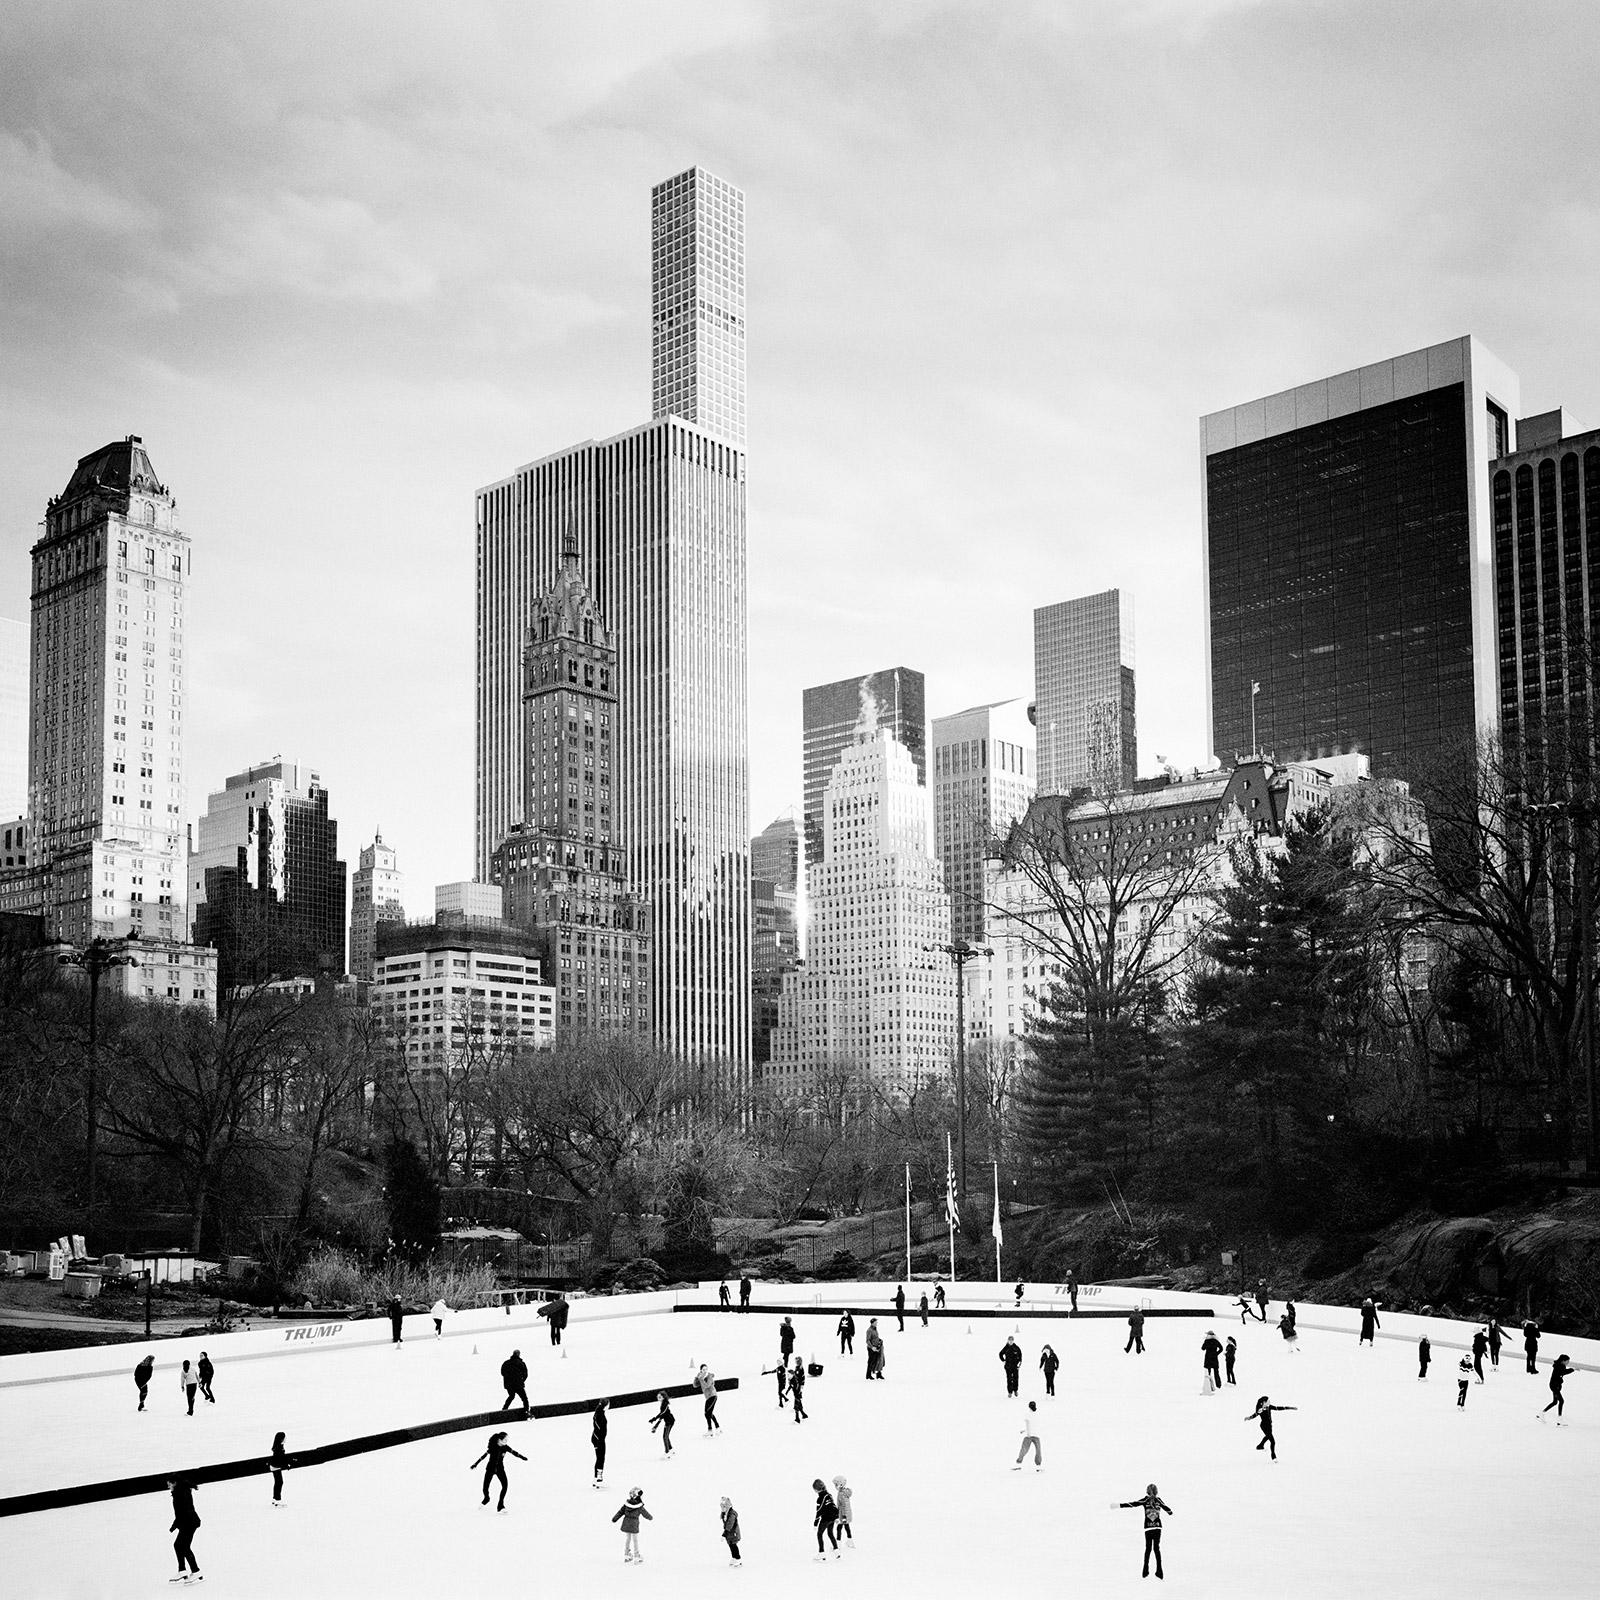 Gerald Berghammer, Ina Forstinger Black and White Photograph - Dancing on Ice, Skyscraper New York City, black and white photography landscape